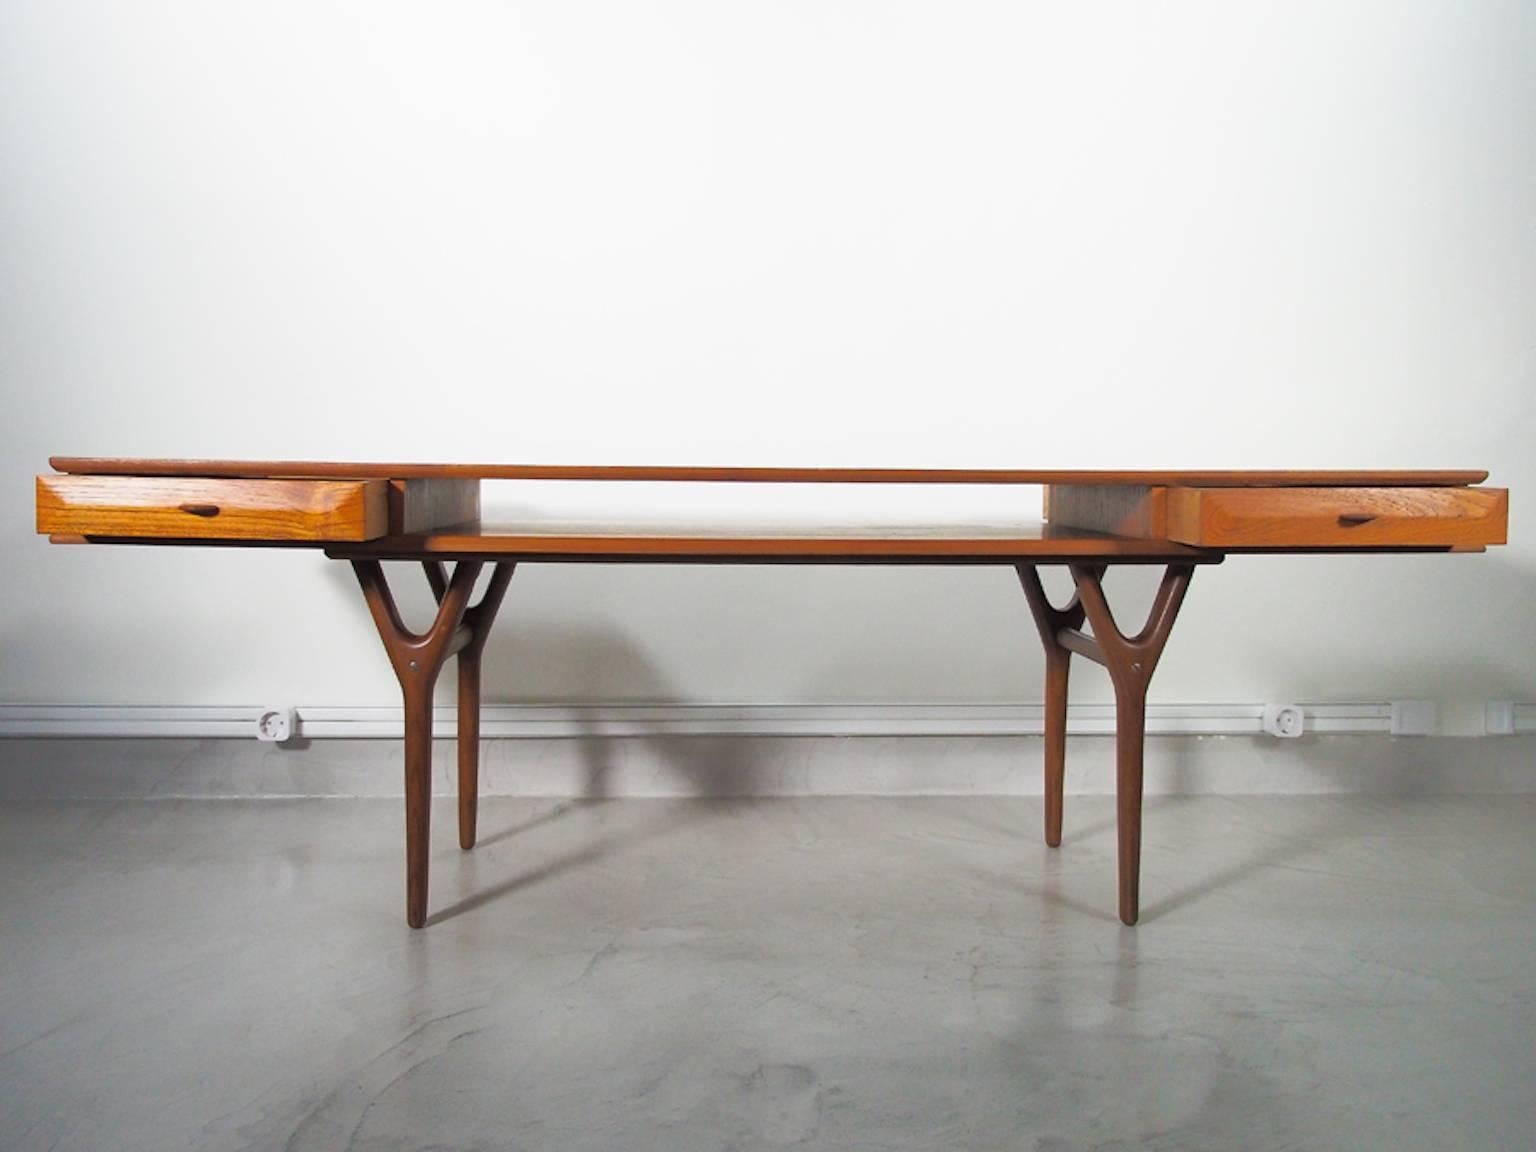 Rectangular teak coffee or console table with four drawers and a storage compartment in the center. Slender V-shaped legs. Produced in Denmark in the style of Johannes Andersen.